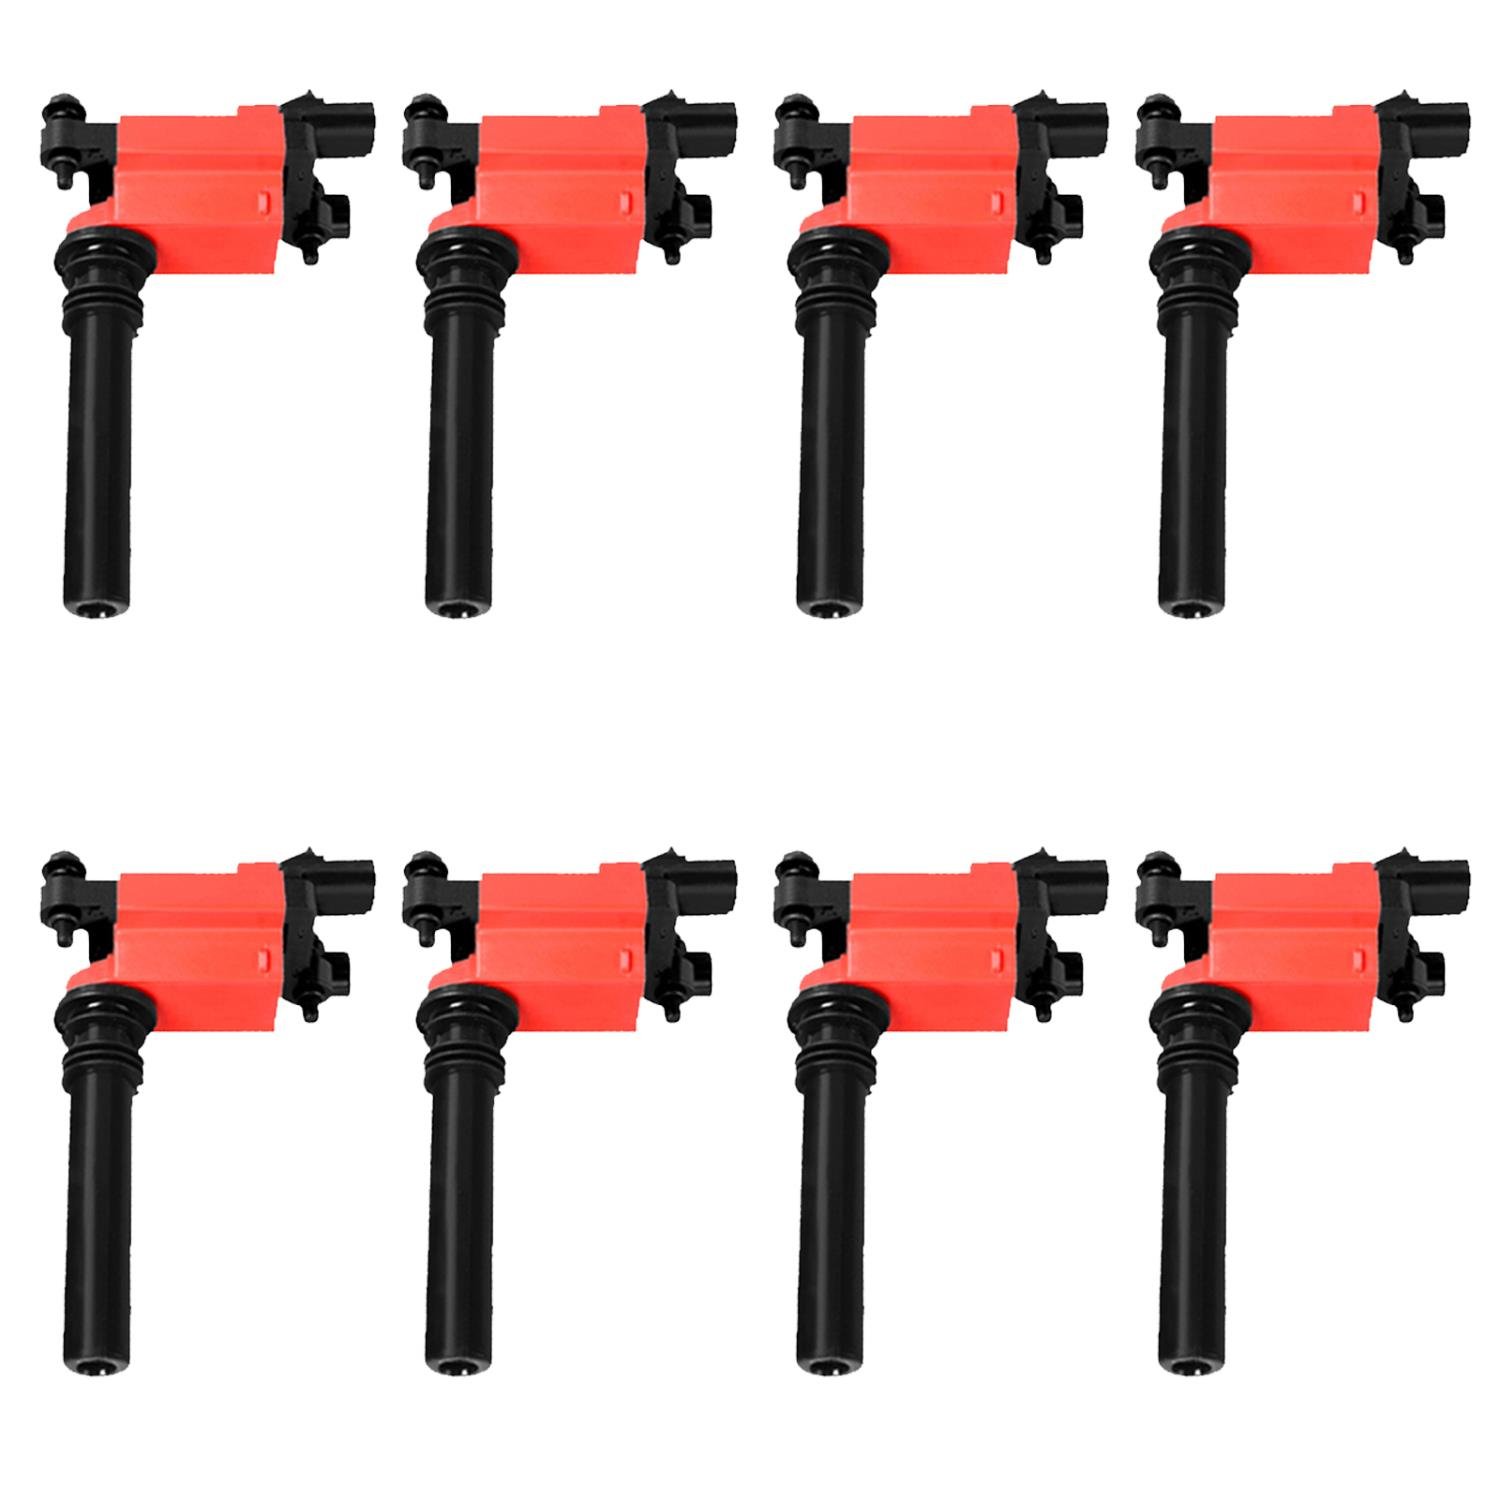 High-Performance Ignition Coils for Dodge Ram 1500/Durango/Chrysler 300/Jeep 5.7L [Red]